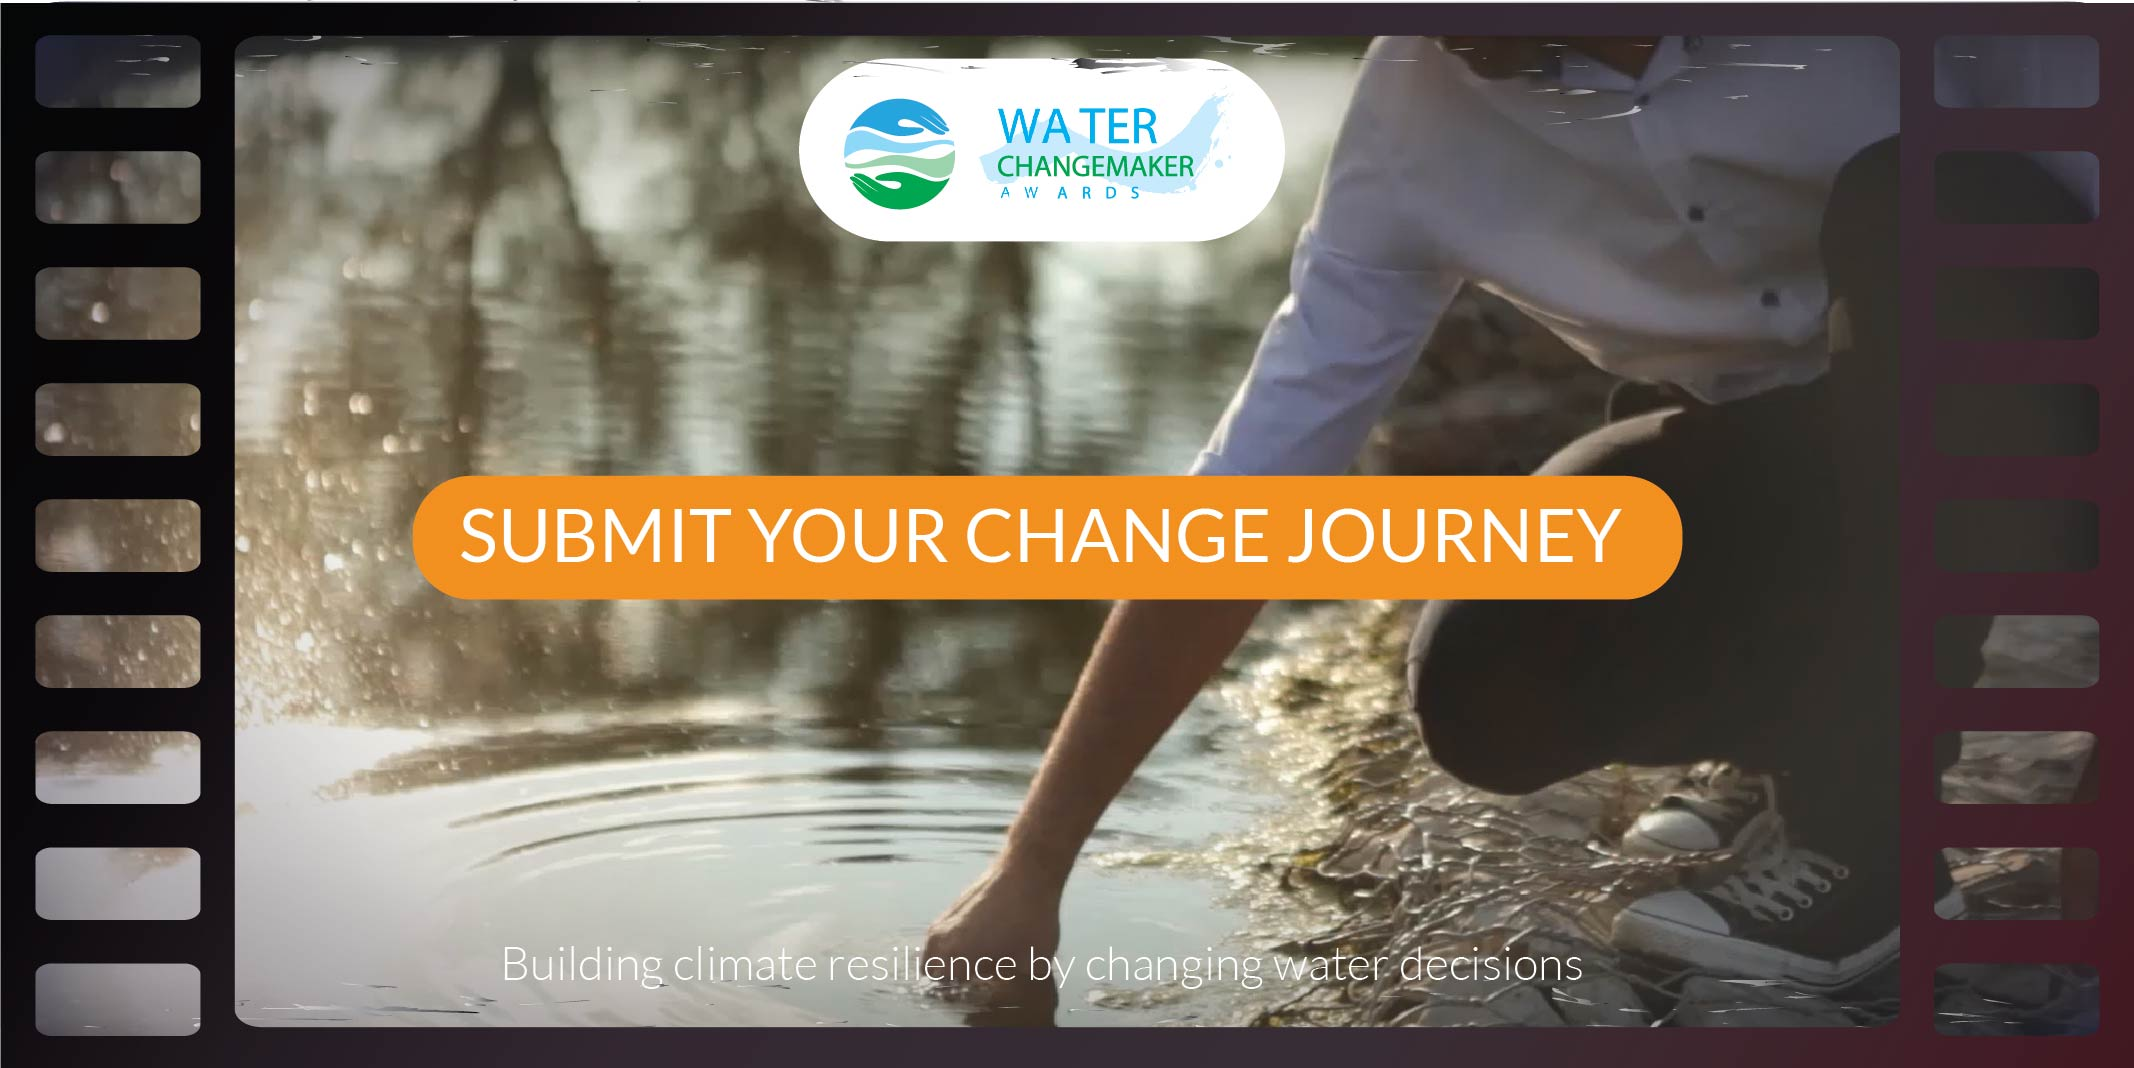 The Water ChangeMaker Awards is inviting submissions from those who have shaped water decisions that have helped build climate resilience. Submi...